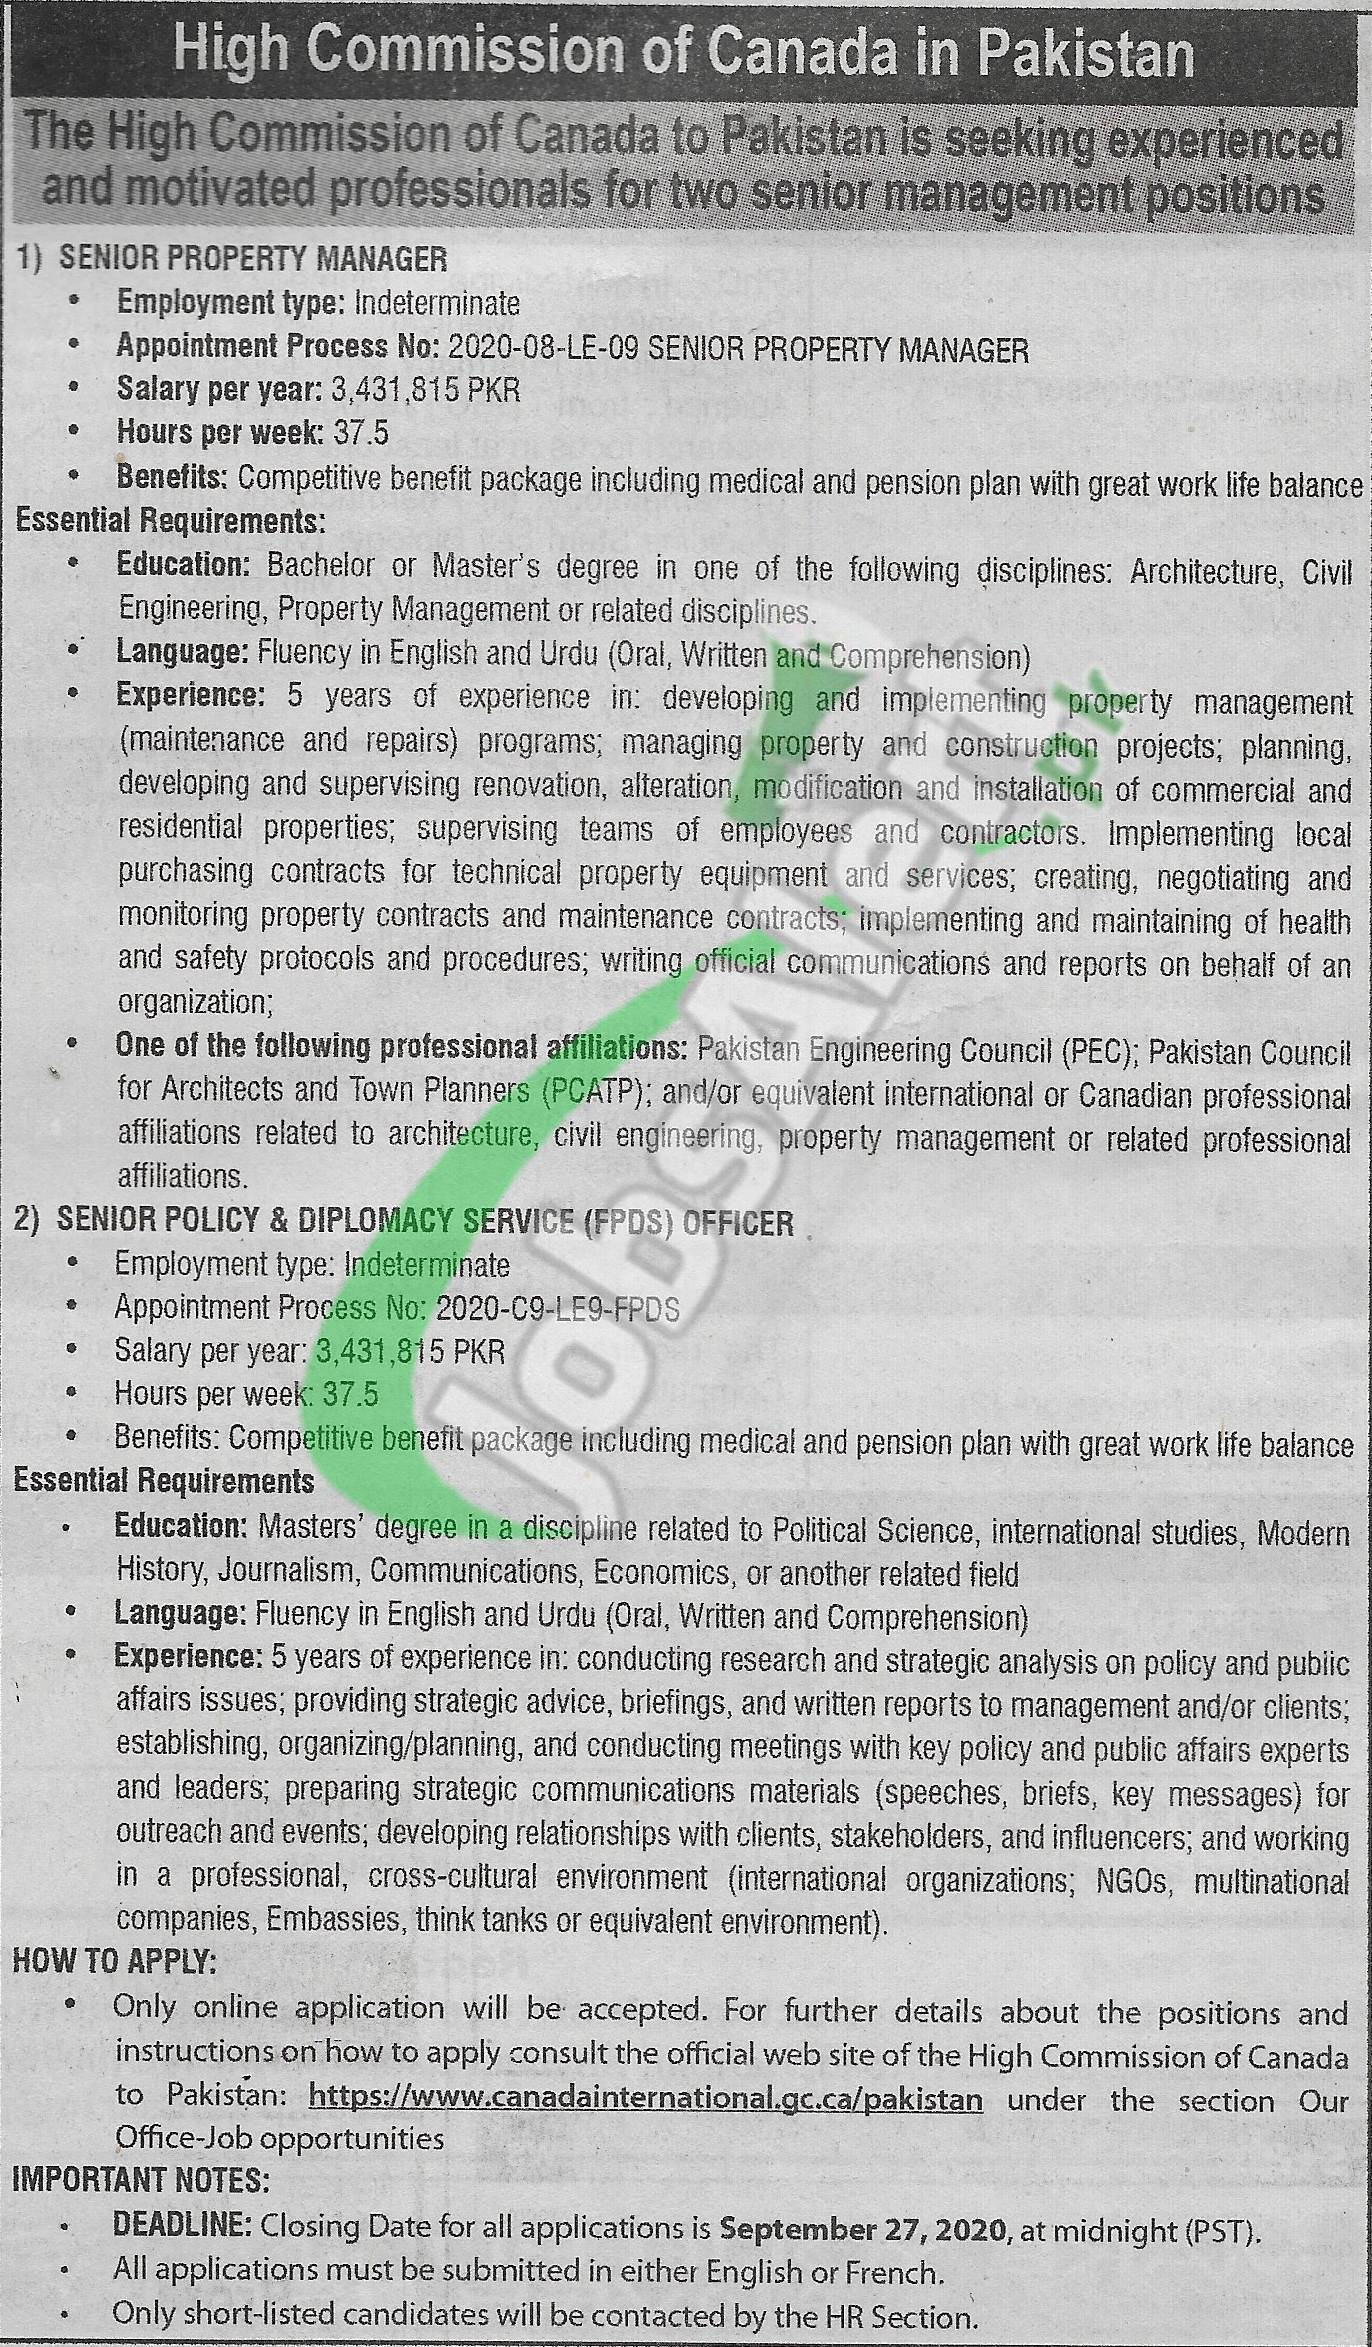 High Commission of Canada Islamabad Jobs